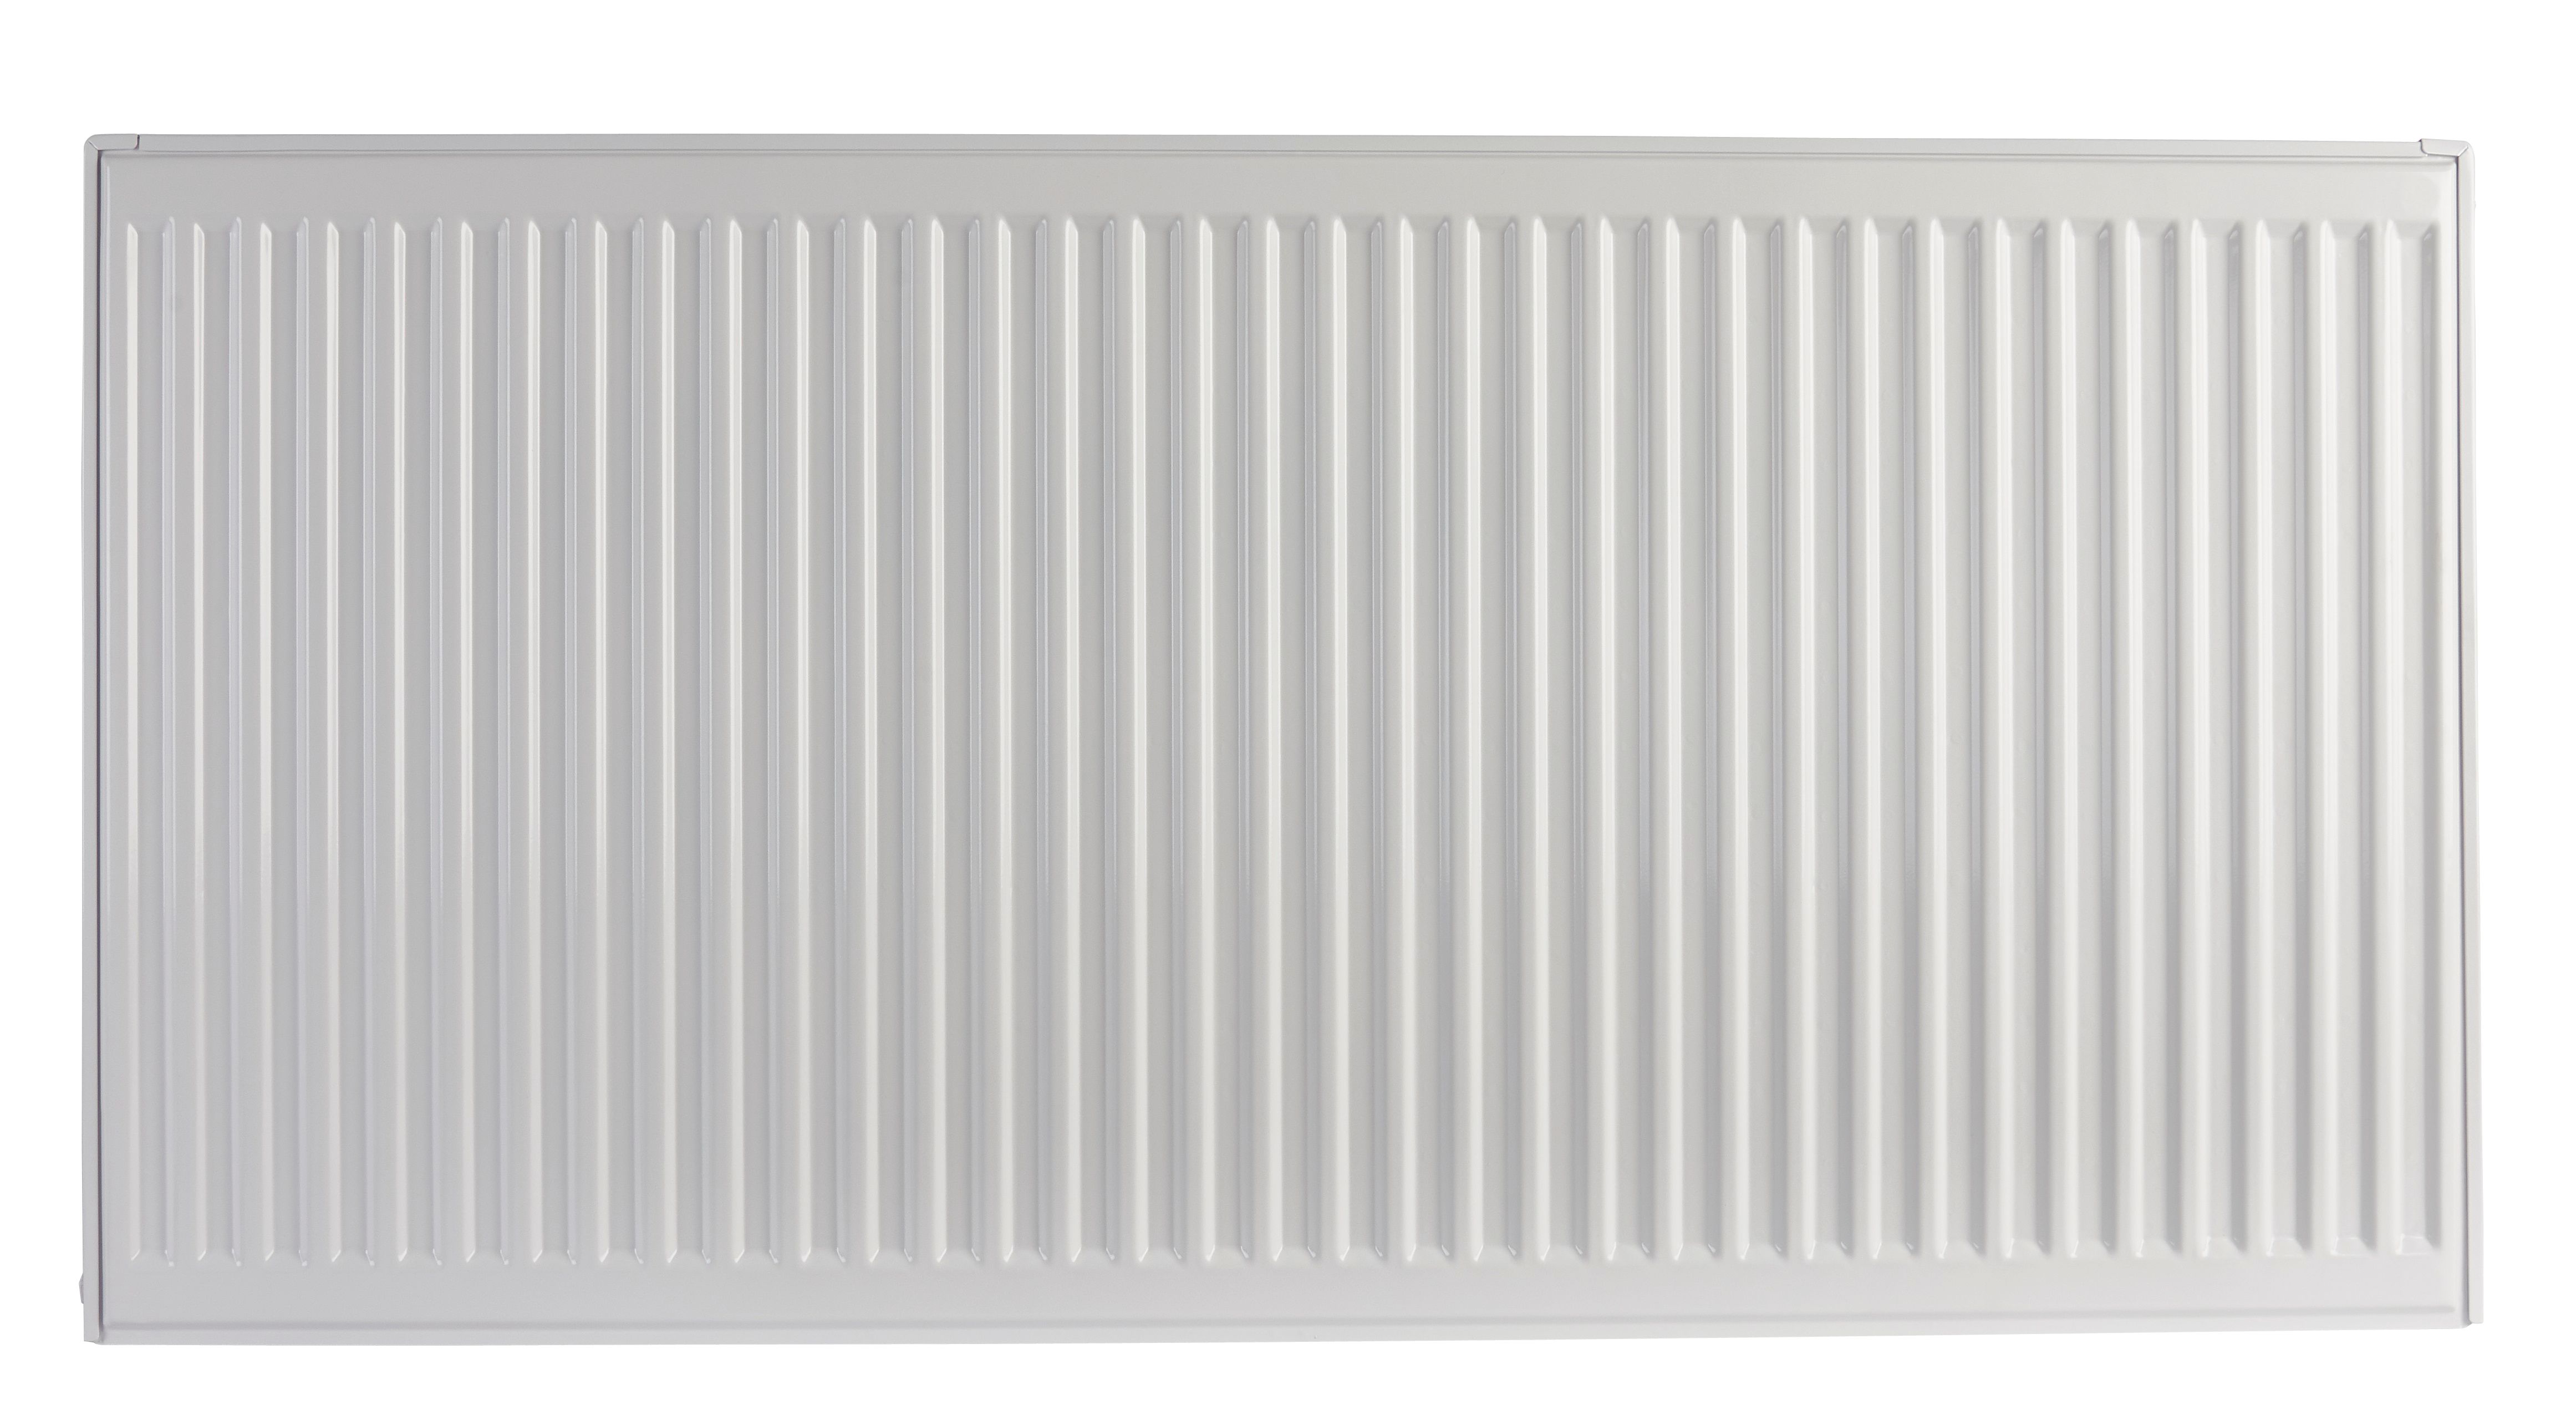 Image of Homeline by Stelrad 500 x 1200mm Type 21 Double Panel Plus Single Convector Radiator